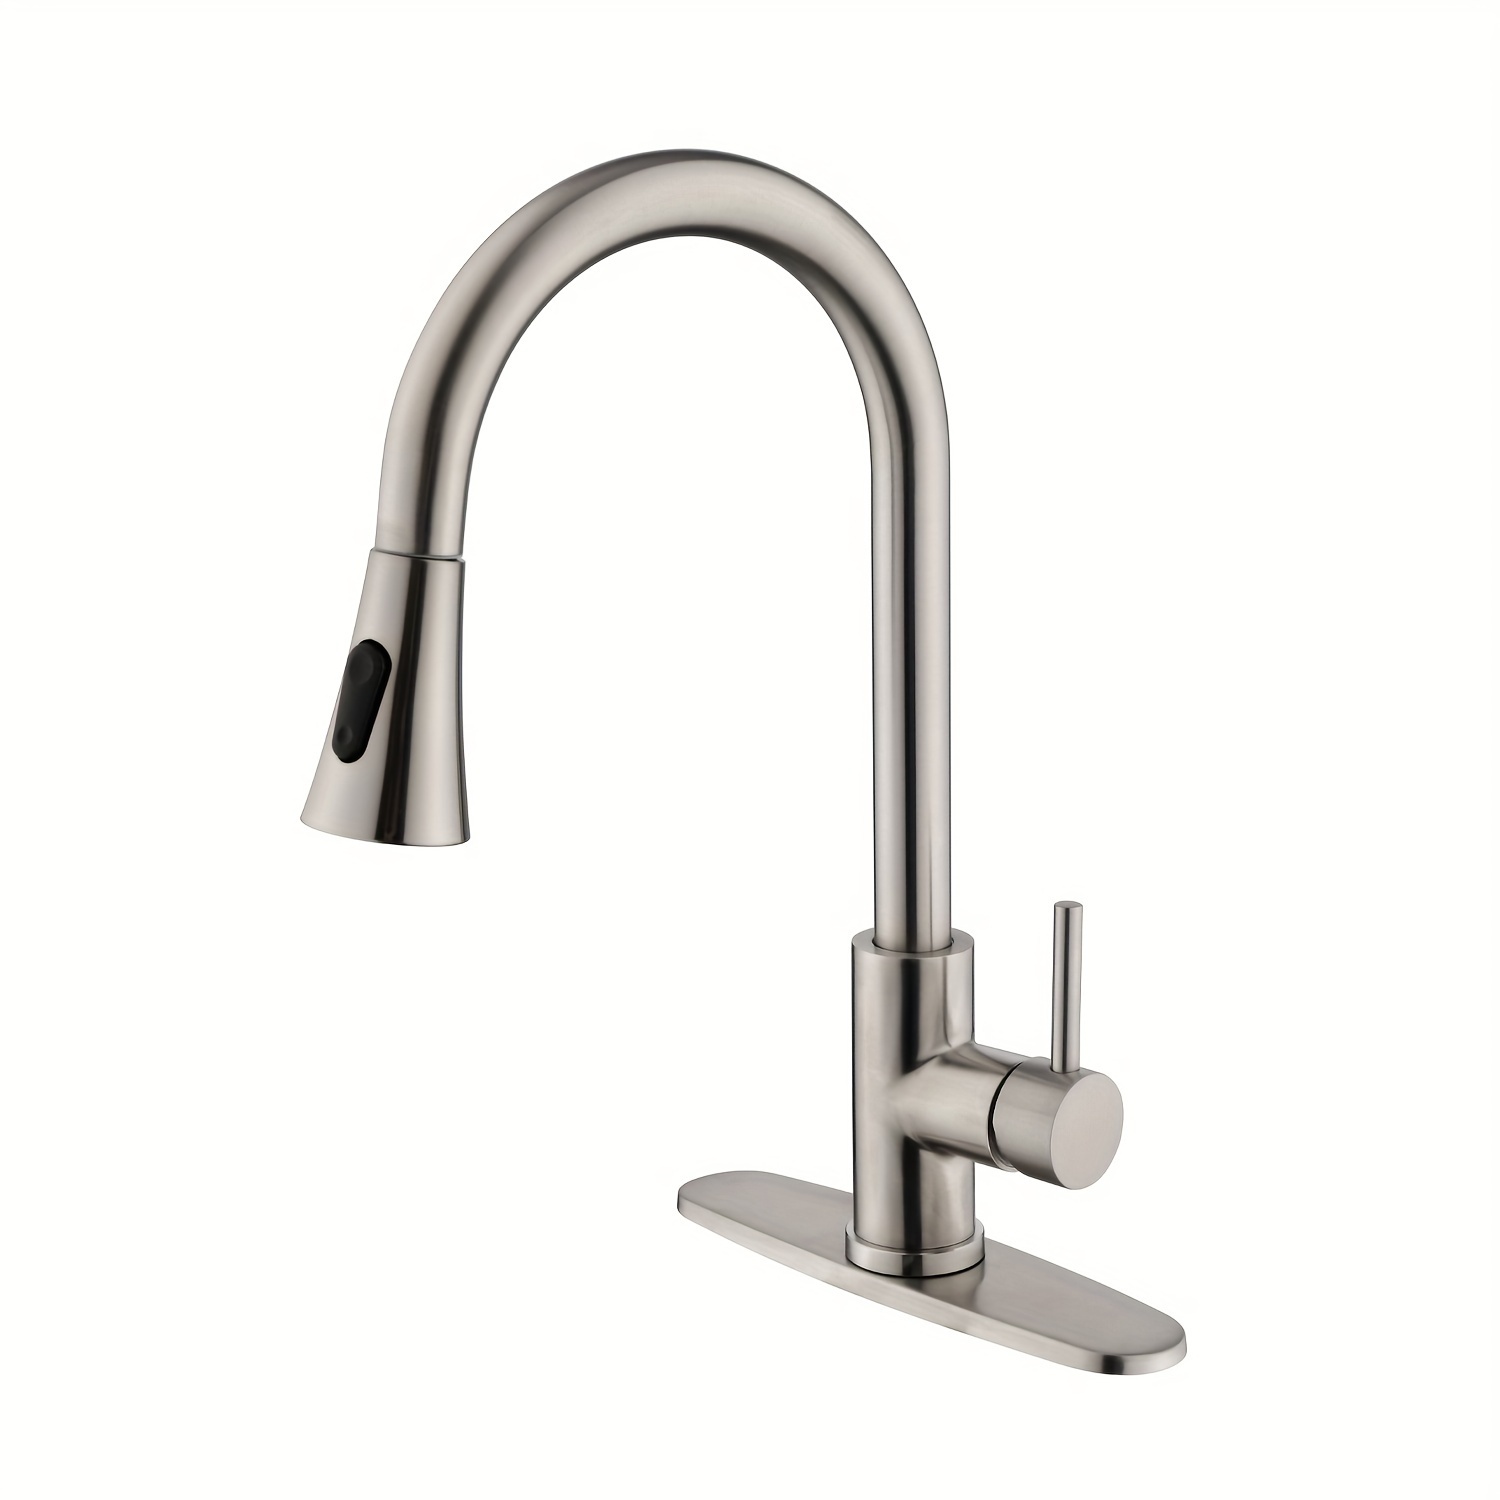 

1pc Kitchen Sink Faucet, Stainless Steel 304 Kitchen Faucet With Pull-down Sprayer, Modern High Arc Single Handle, Pull-out Kitchen Faucet